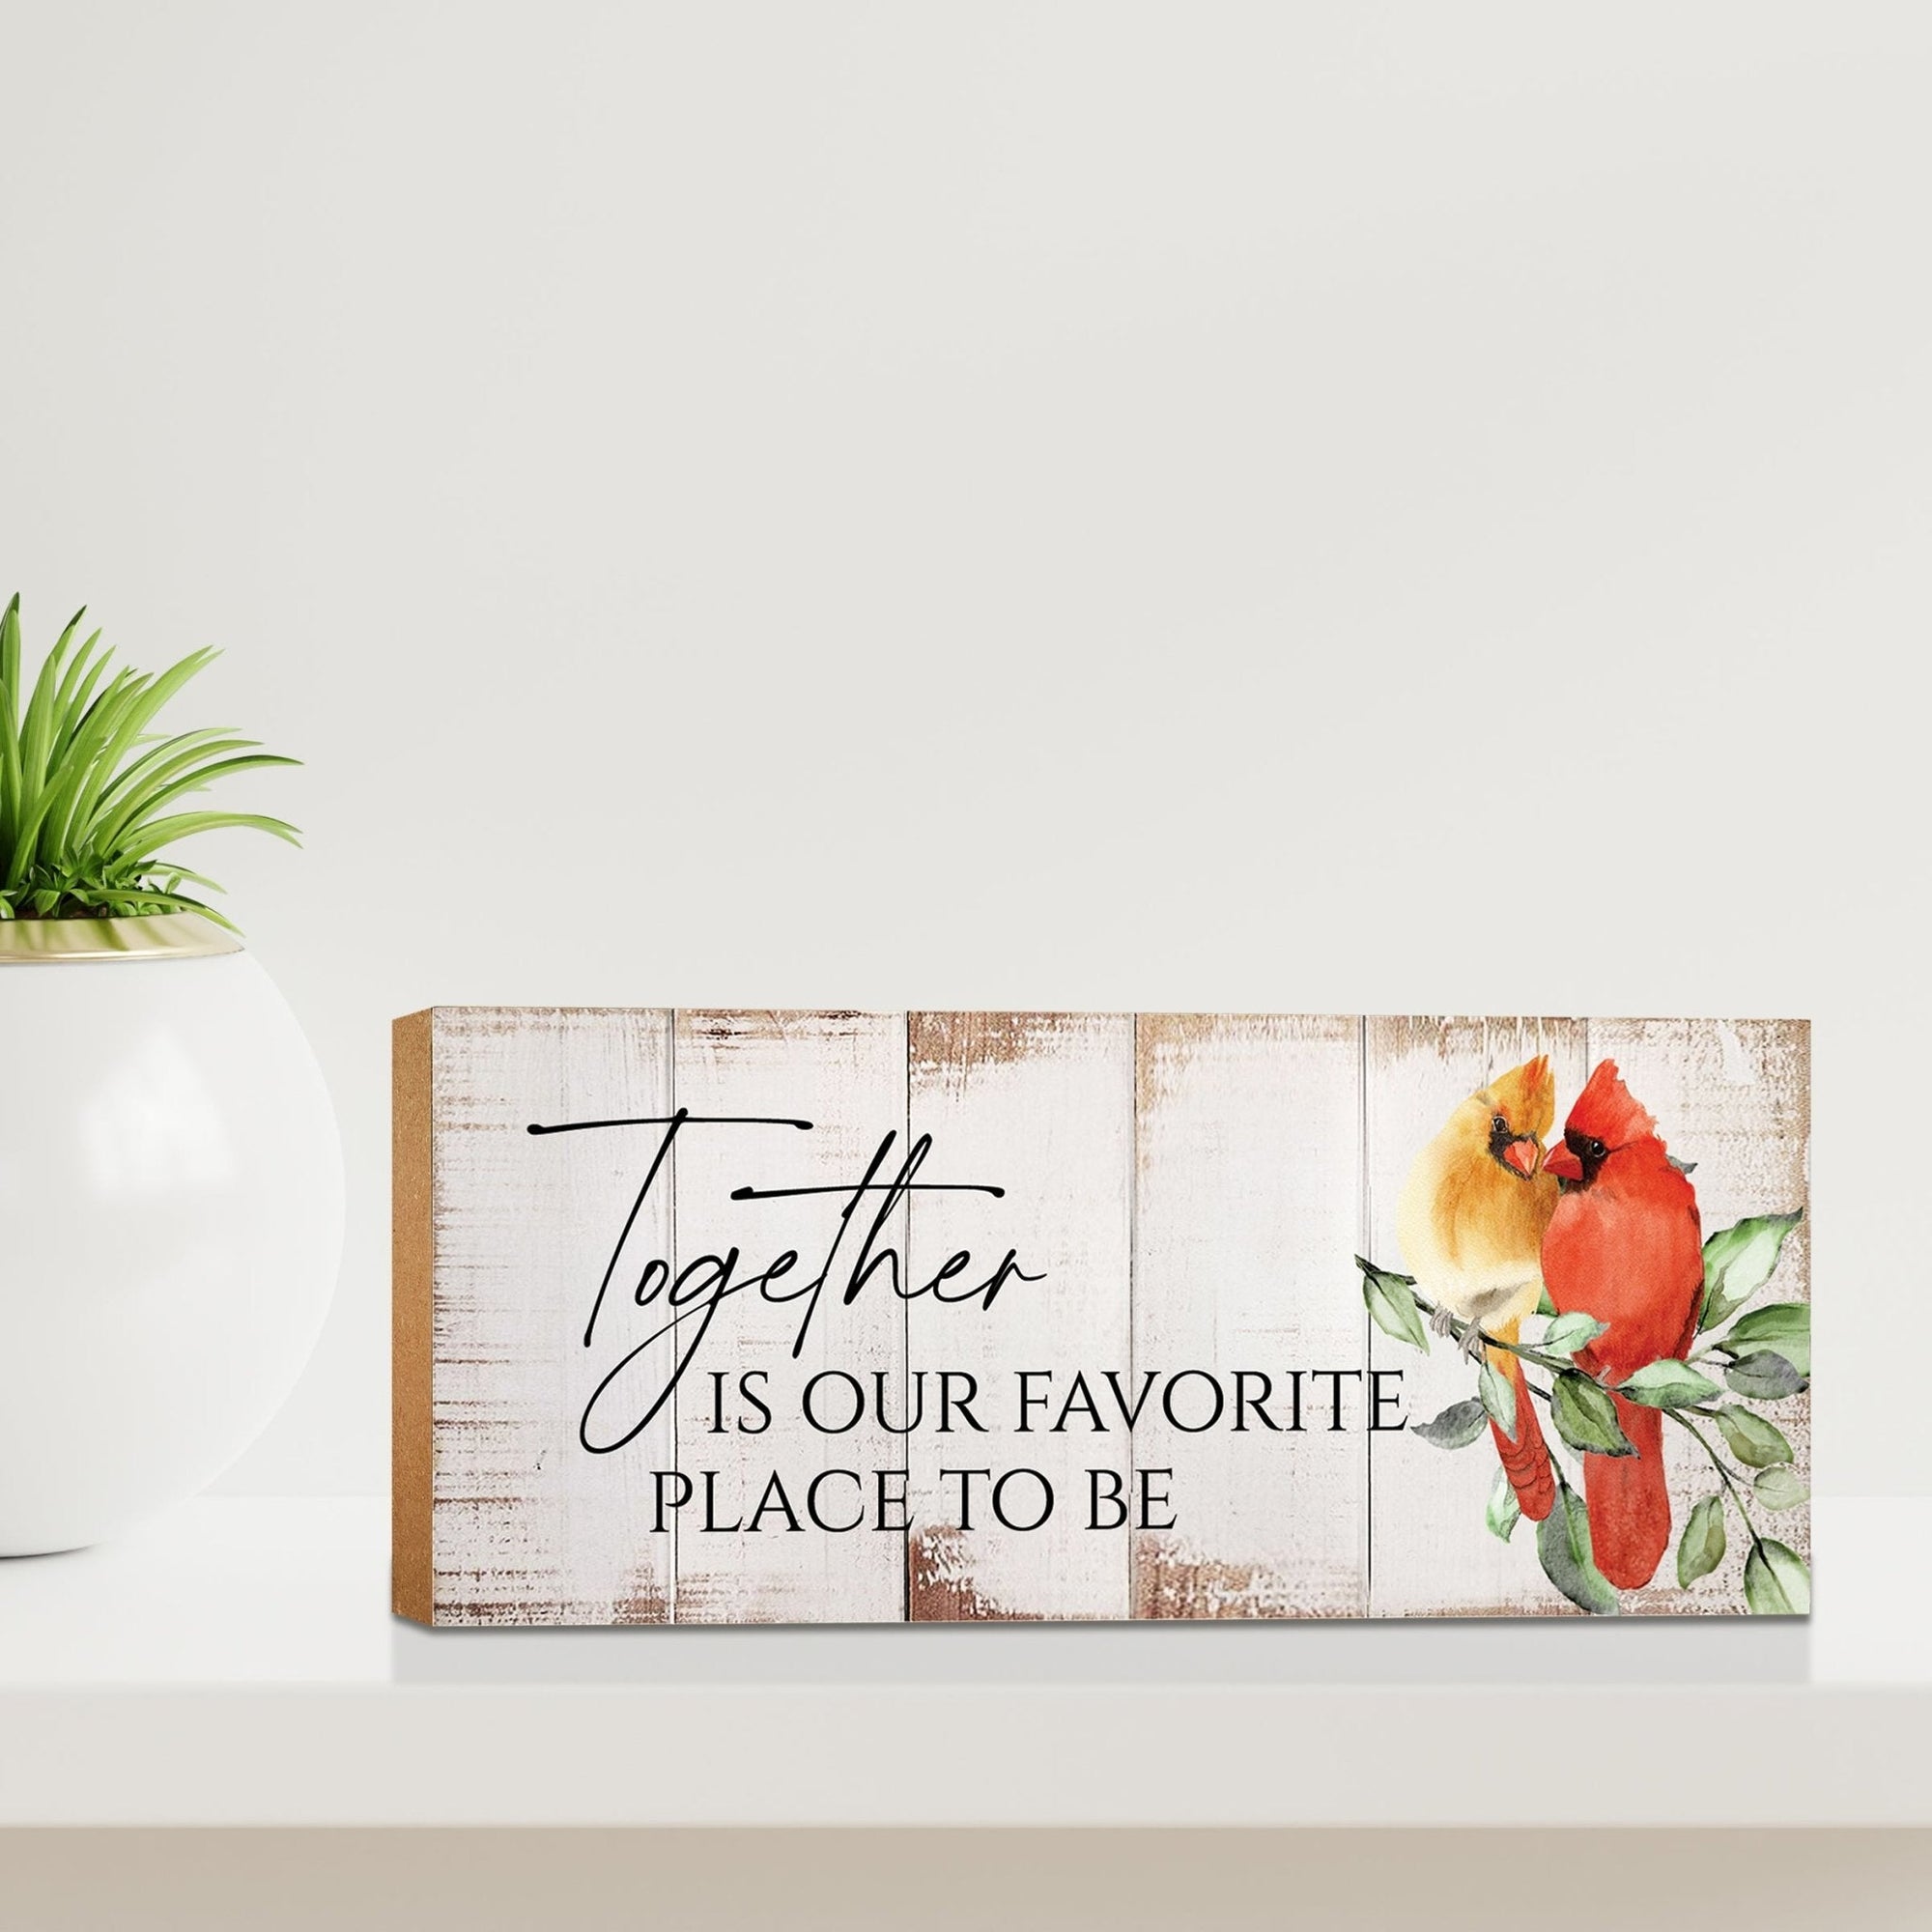 Handcrafted wooden signs for a touch of warmth and inspiration.